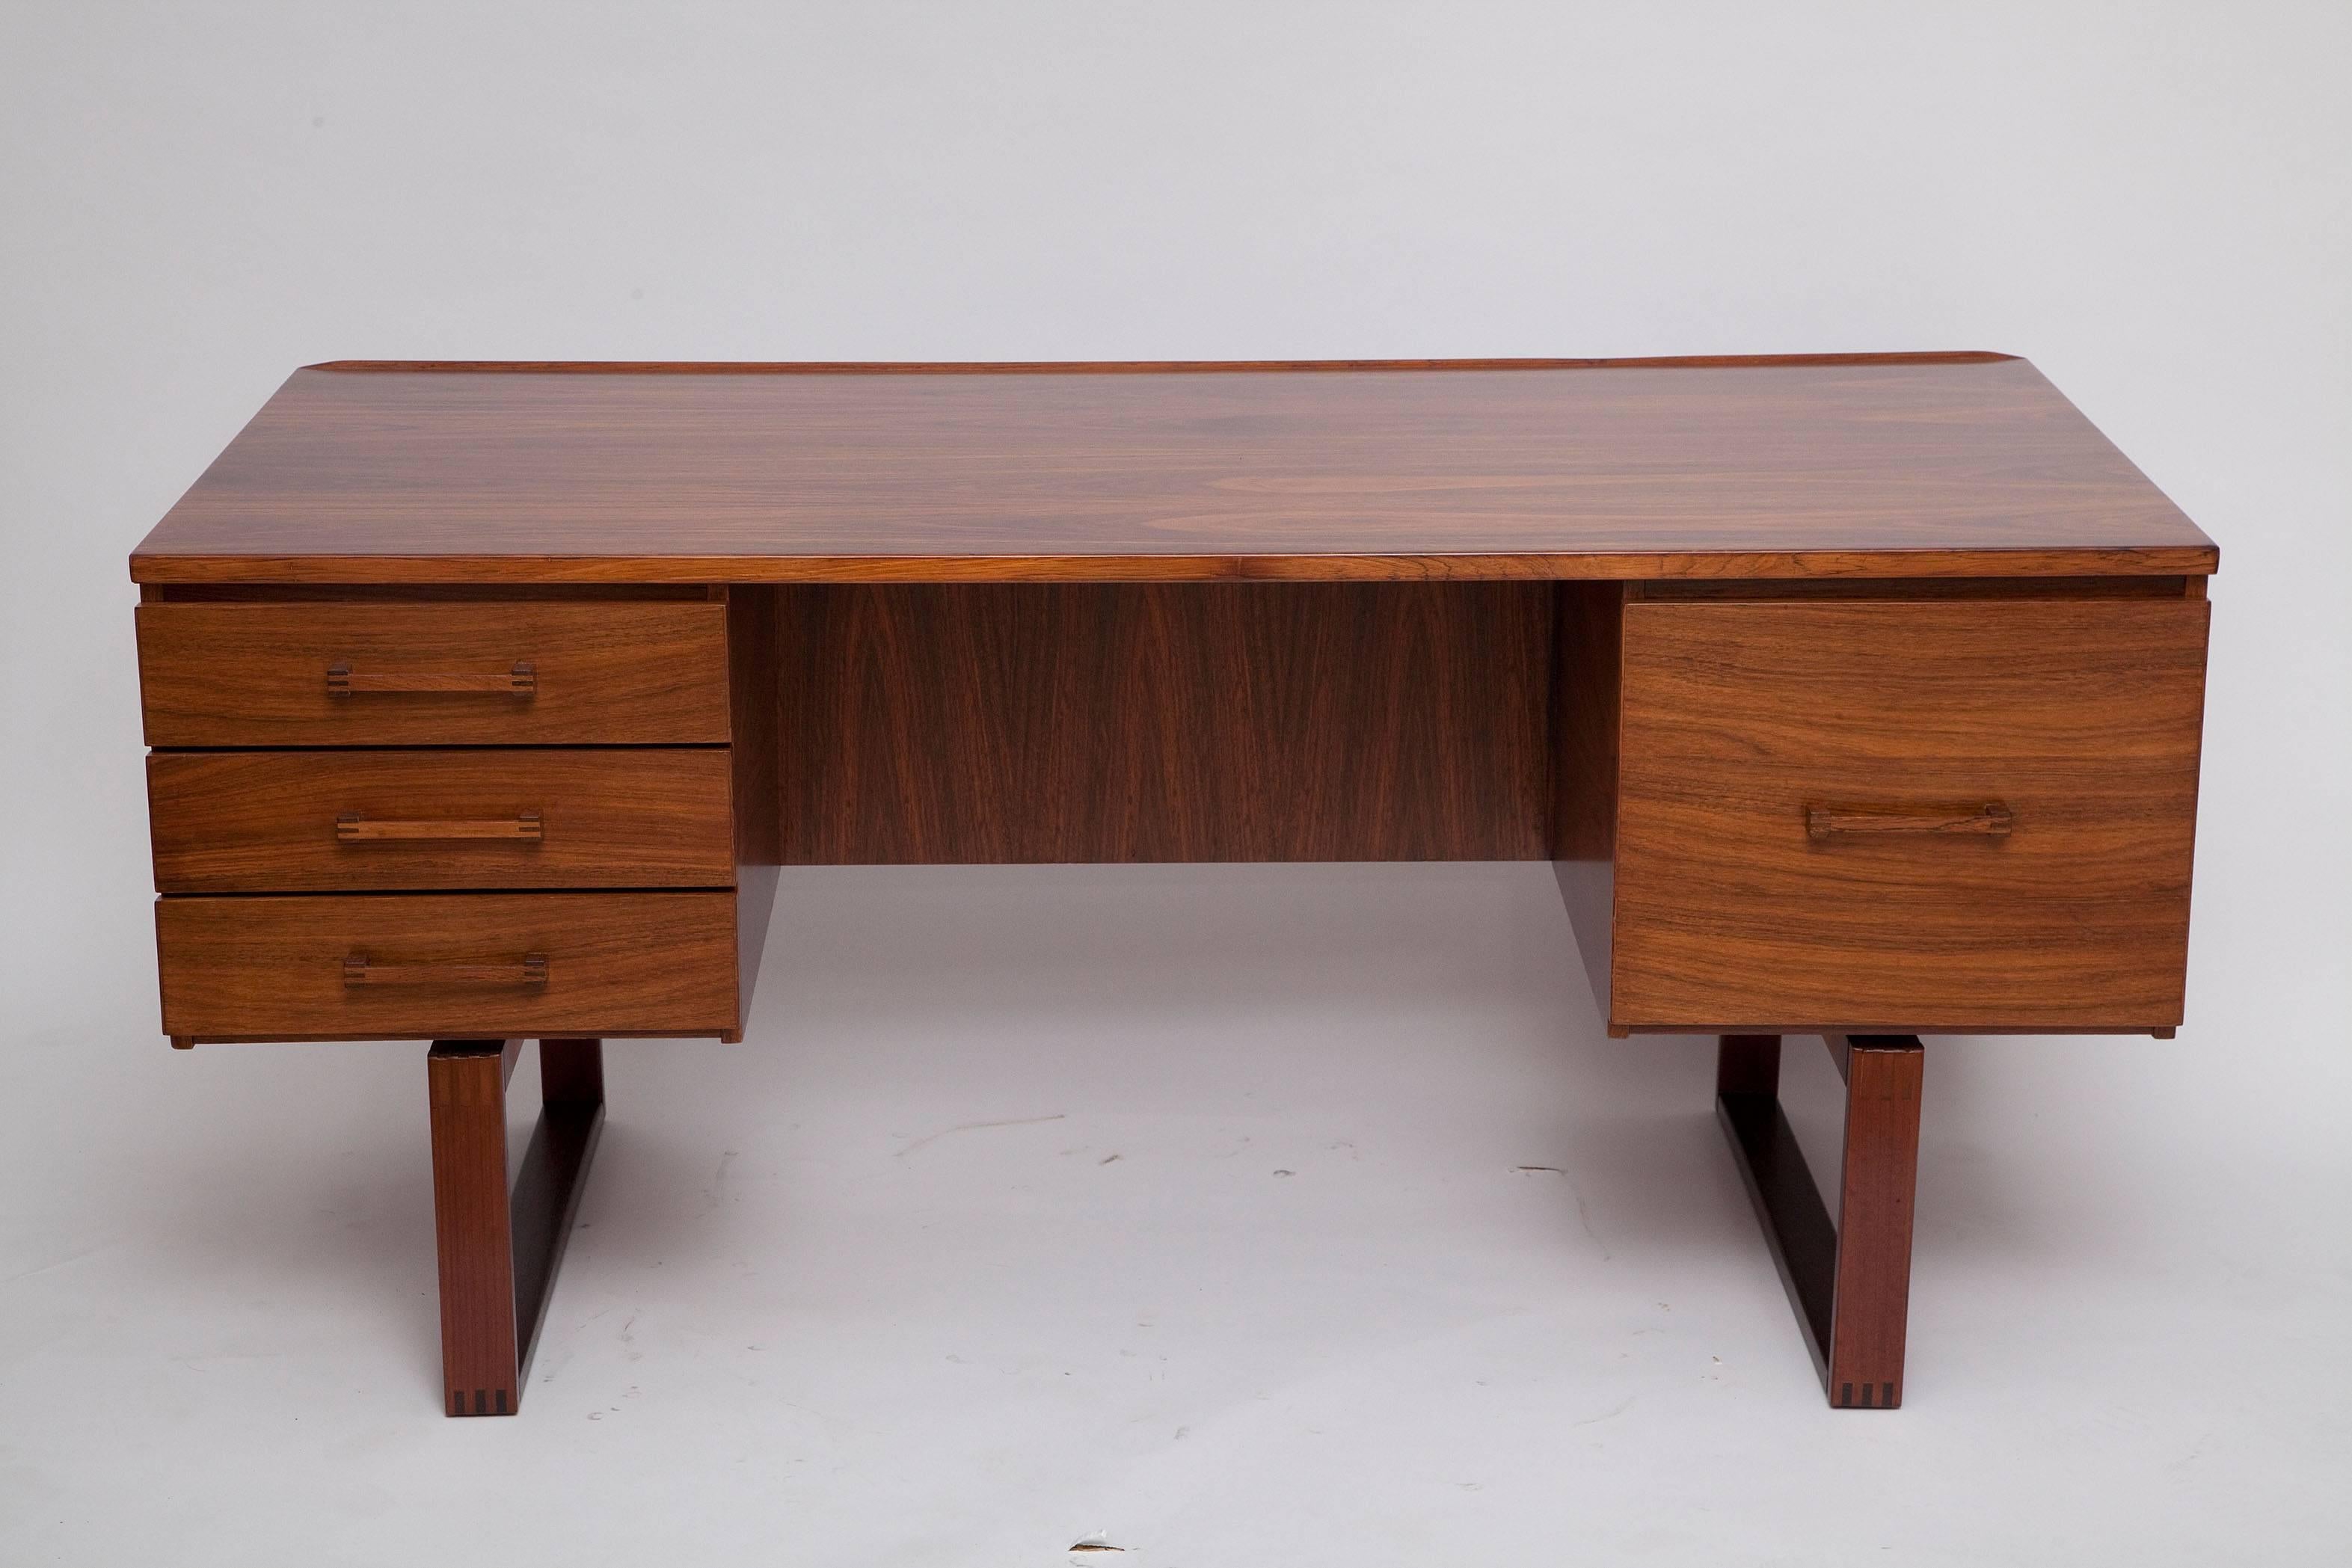 This handsome Brazilian rosewood, 1960s Danish executive desk by Henning Jensen and Torben Valeur features unique finger-jointed legs and drawer pulls. Finished back features a large storage niche for displaying collectibles or books. Kneehole